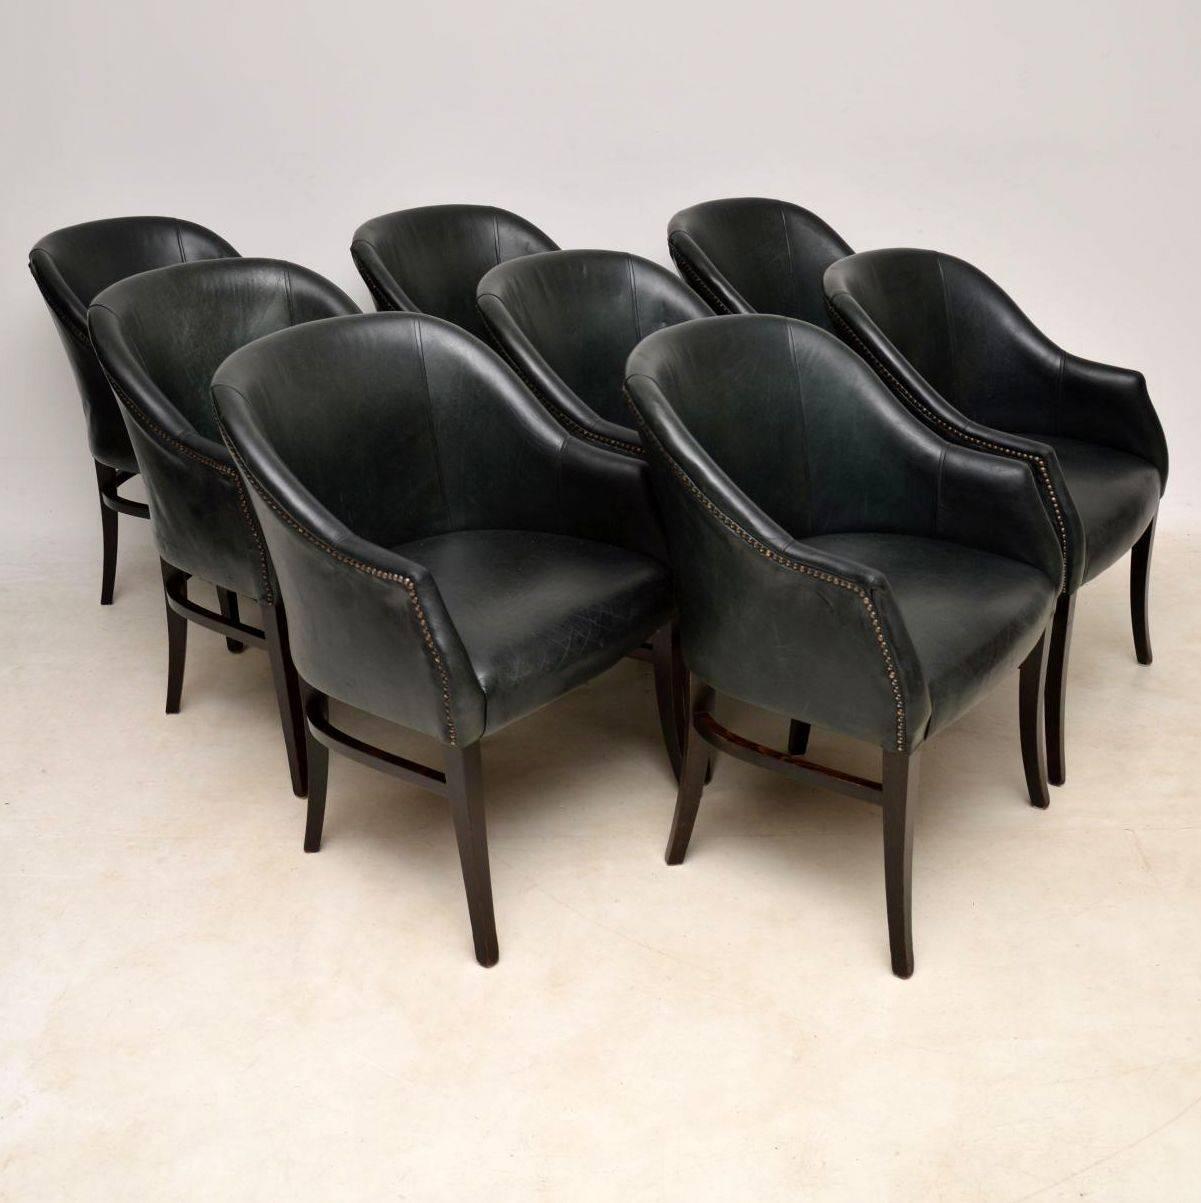 A beautiful set of eight vintage leather tub dining chairs, these date from around the 1960s-1970s. The quality is excellent, they are upholstered in a lovely deep green studded leather. The condition is great for their age, the leather is nicely